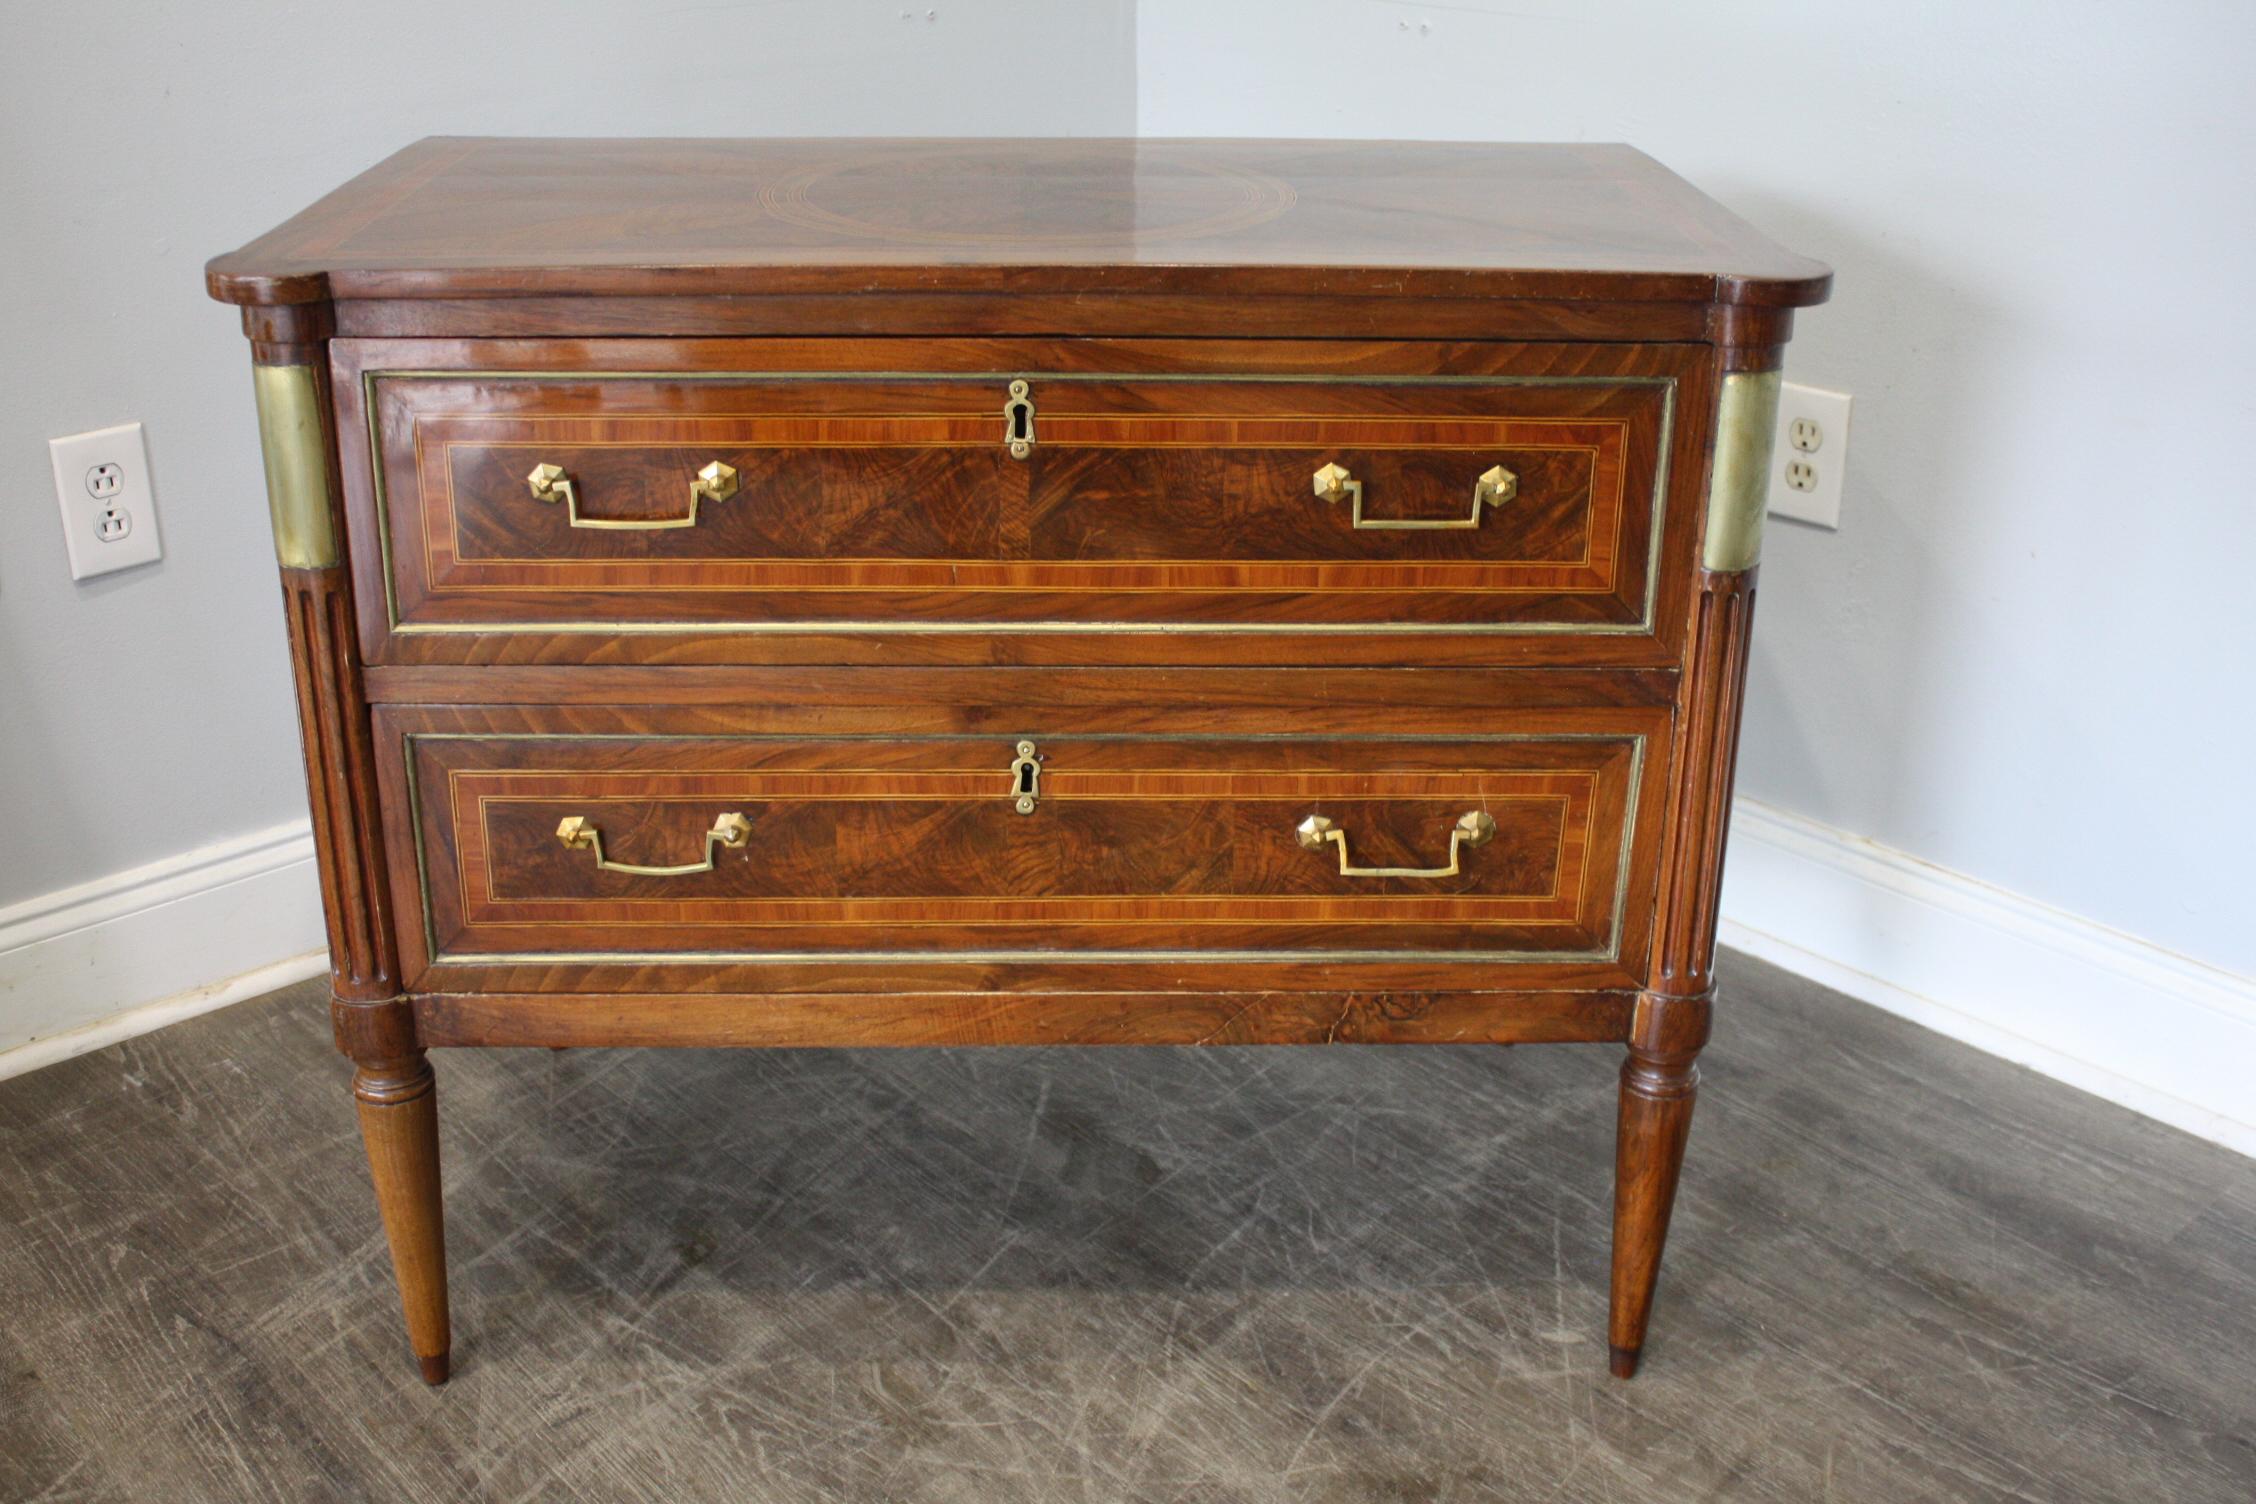 This late 18th century commode is very rich with the different wood, patterns and brass. It is covered with an original veneer.